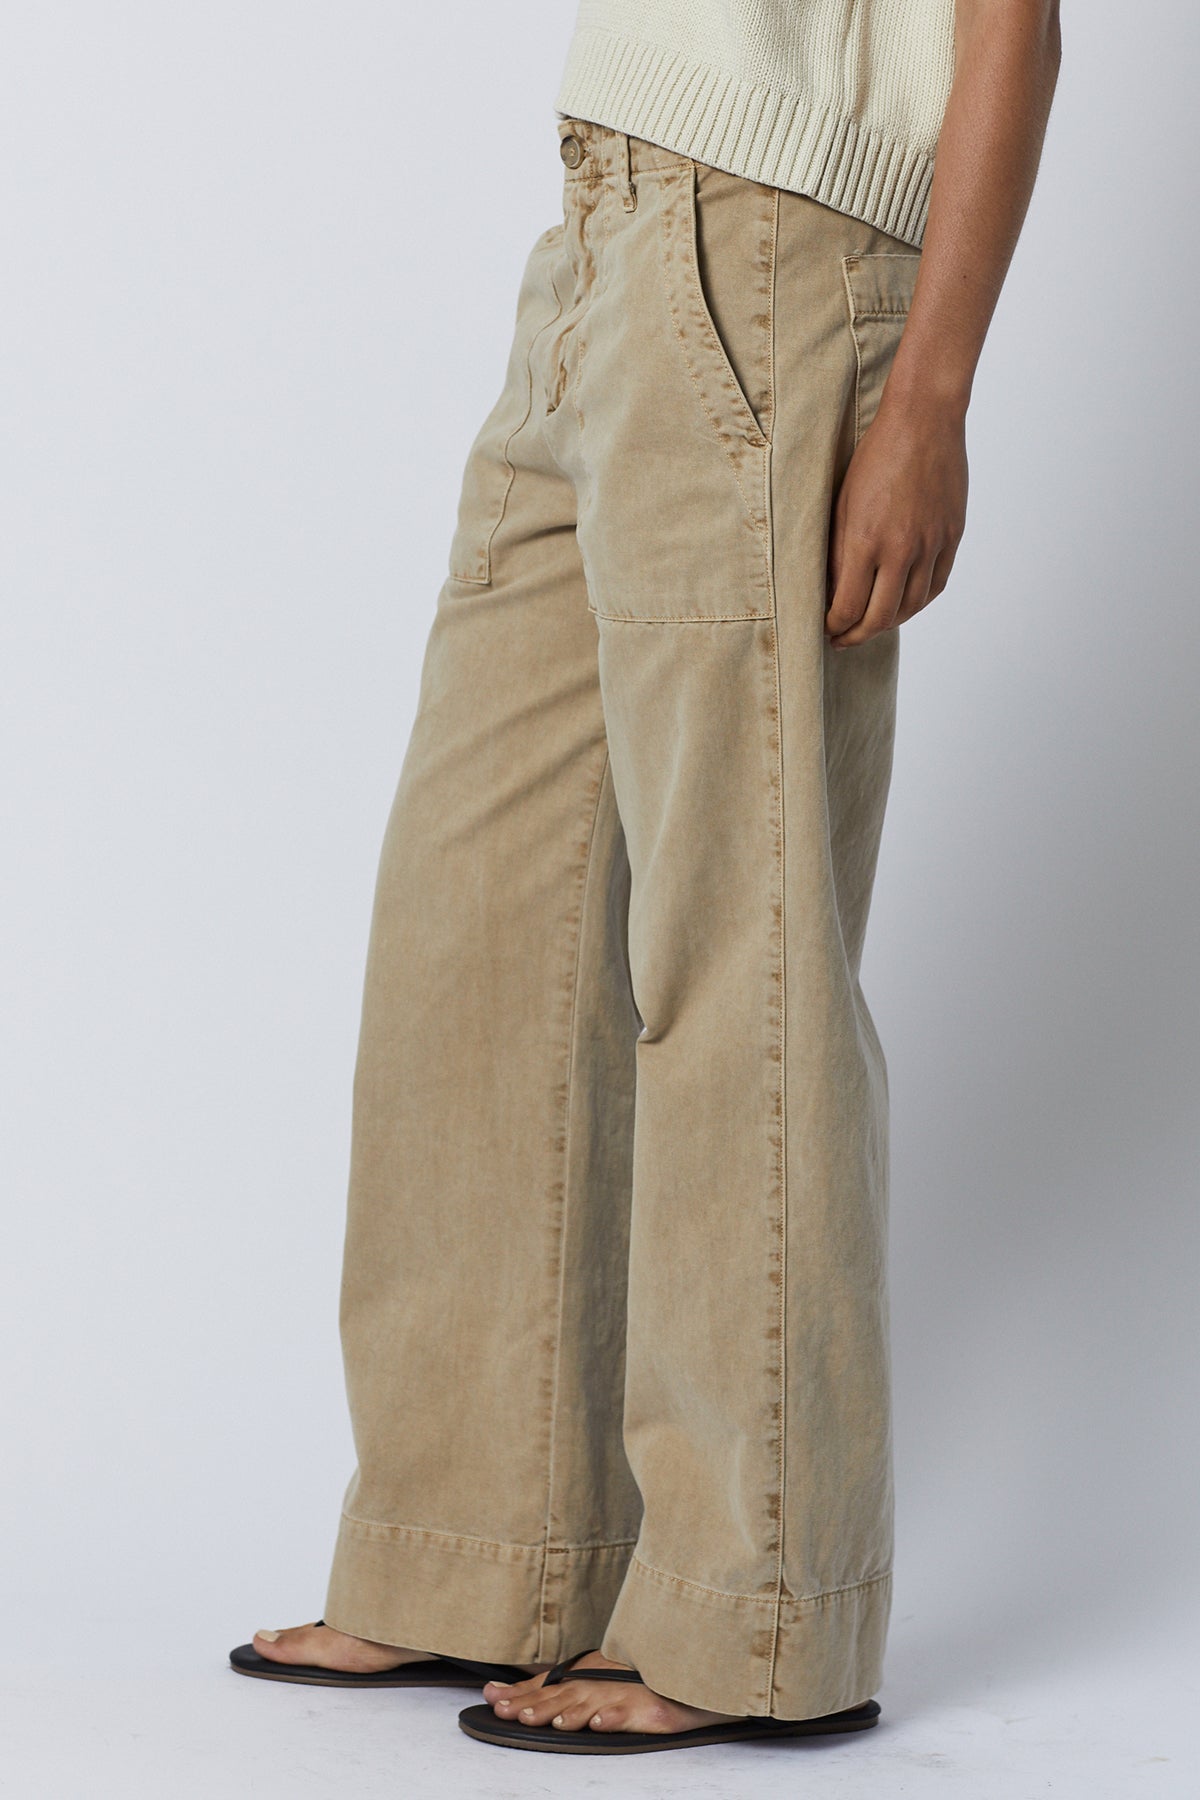 Ventura Pant in putty side-26007116153025